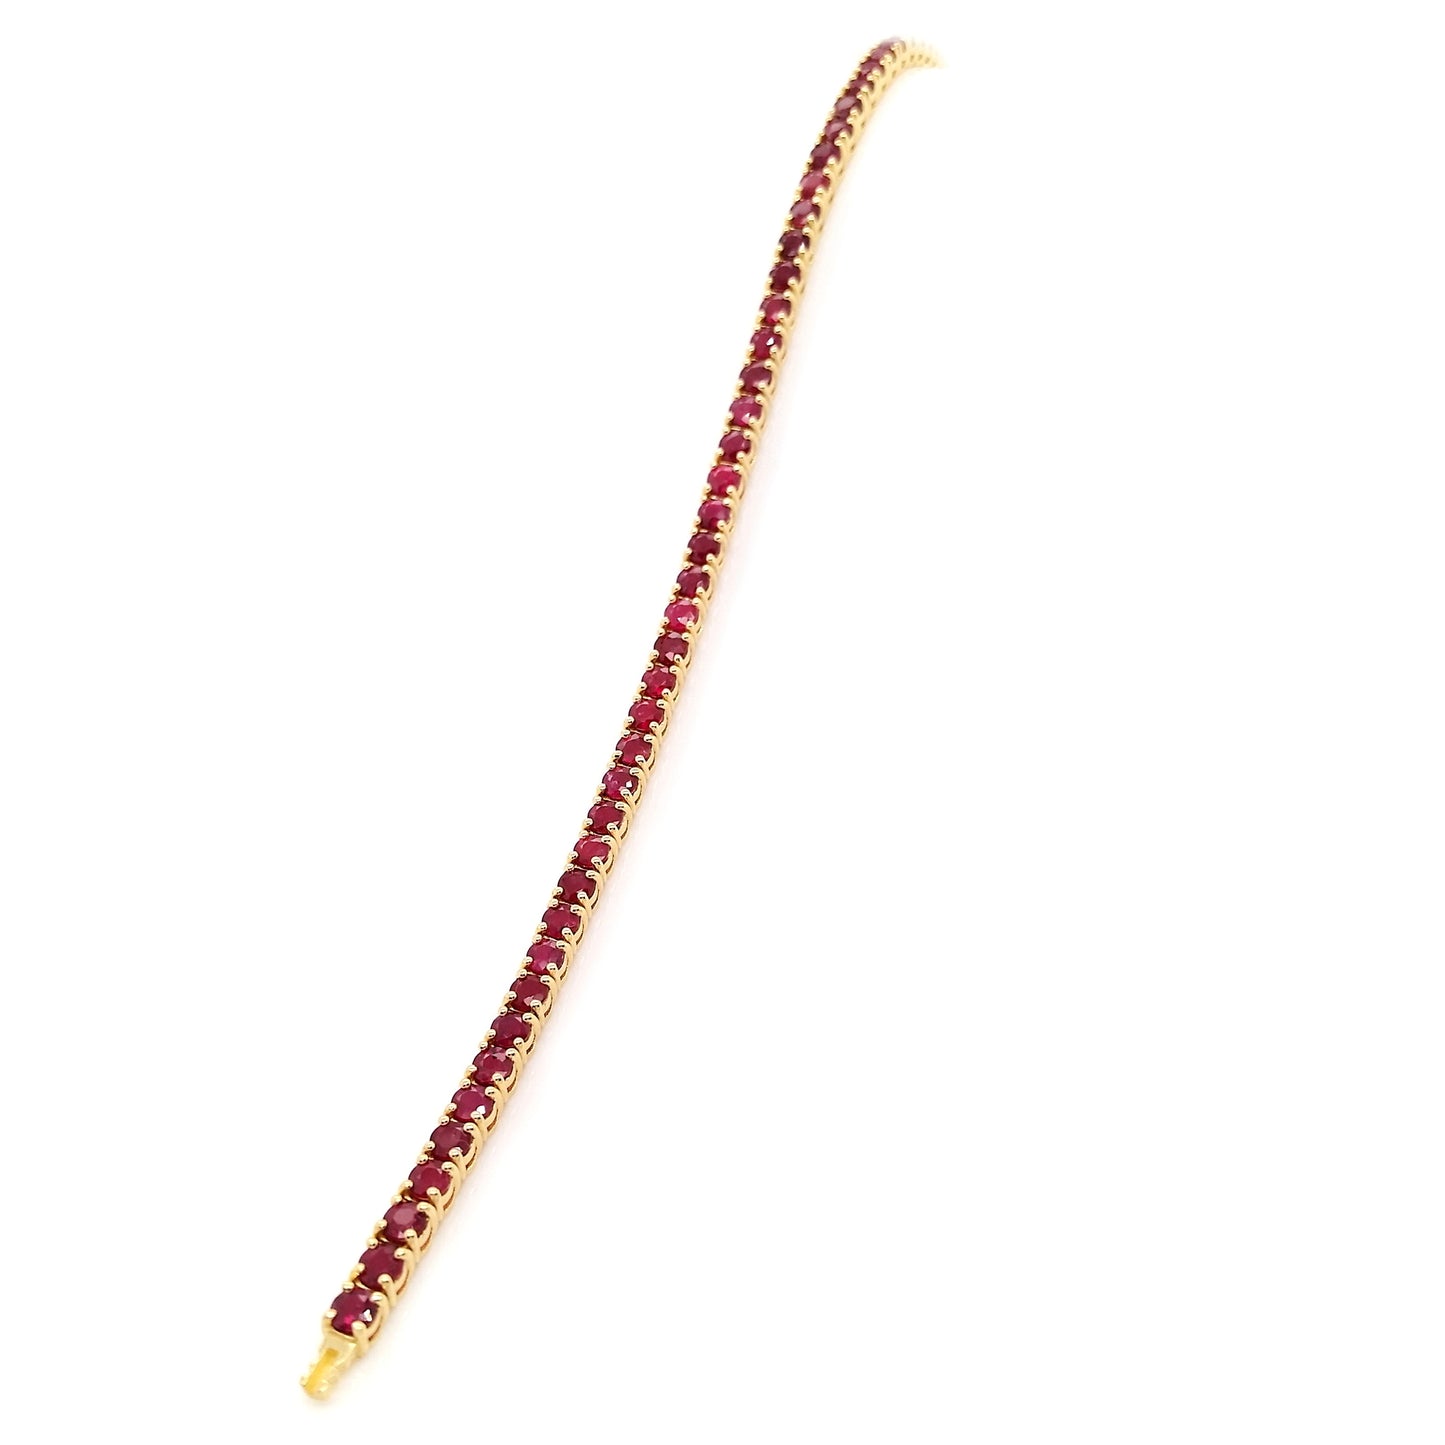 7.27ct Natural Rubies set with 14Kt Yellow Gold Bracelet - SALE